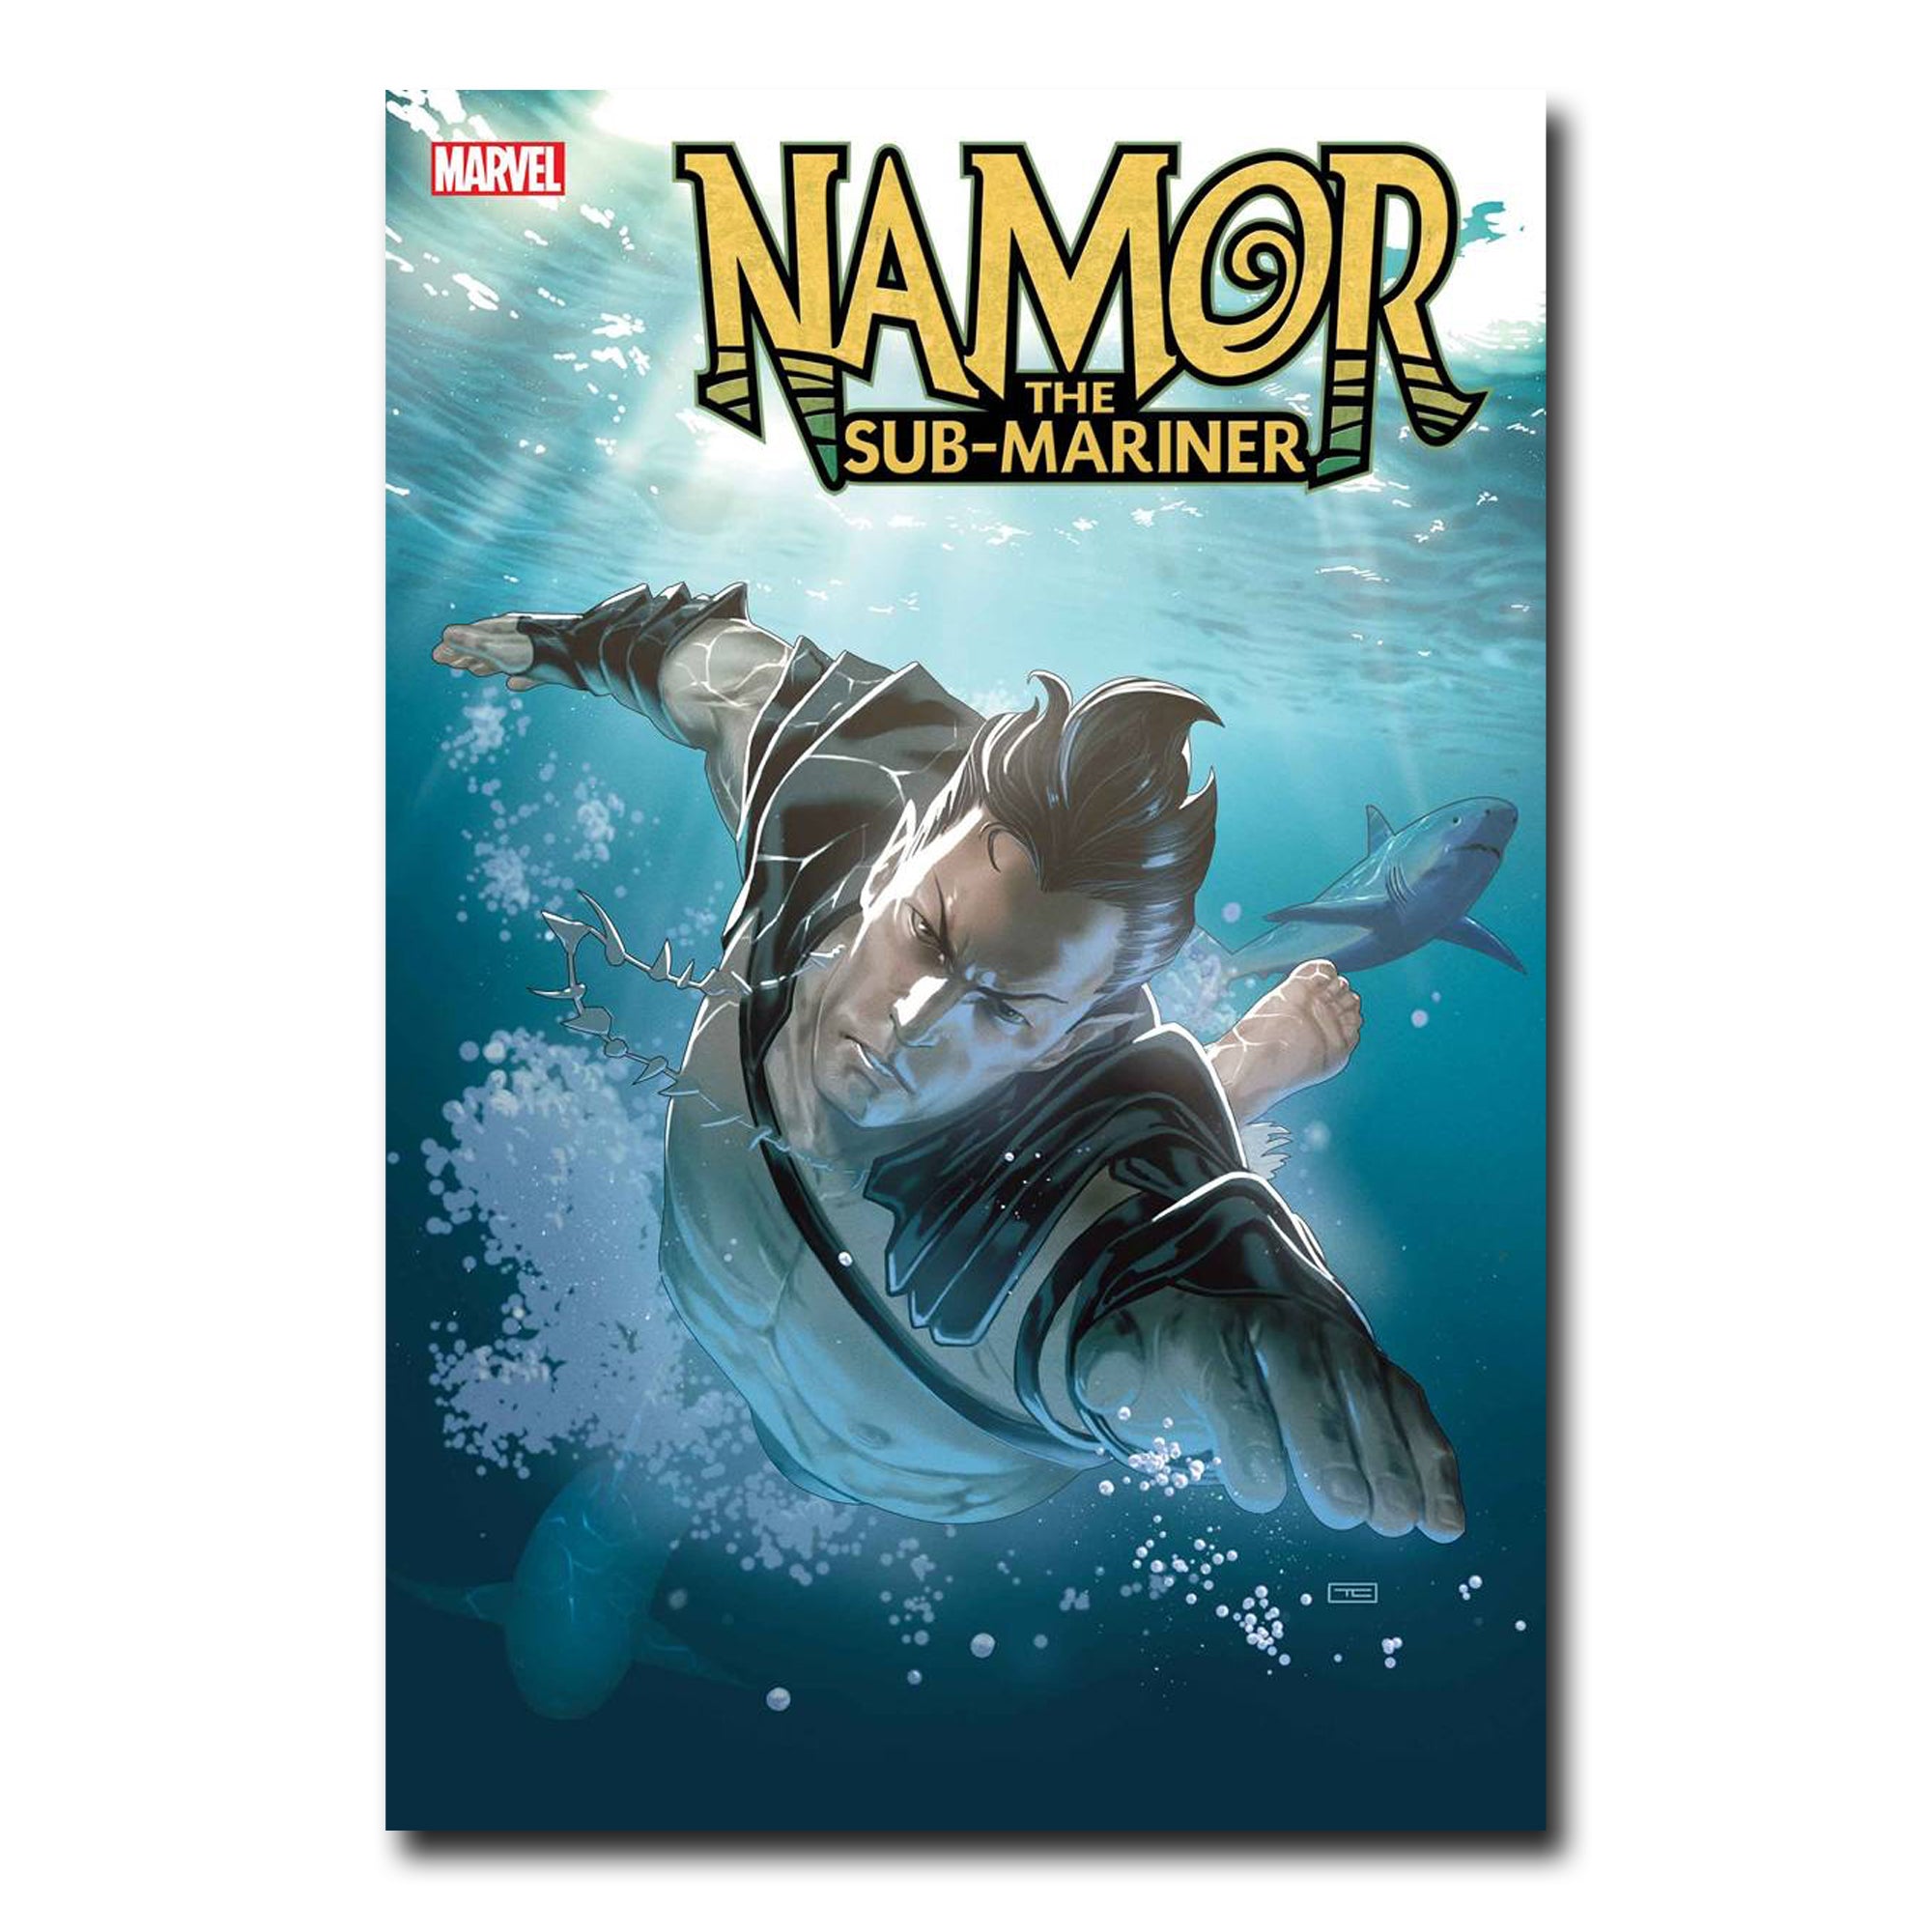 Namor Sub-Mariner Conquered Shores #1 (of 5) Cover Variant CLARKE FINALSALE